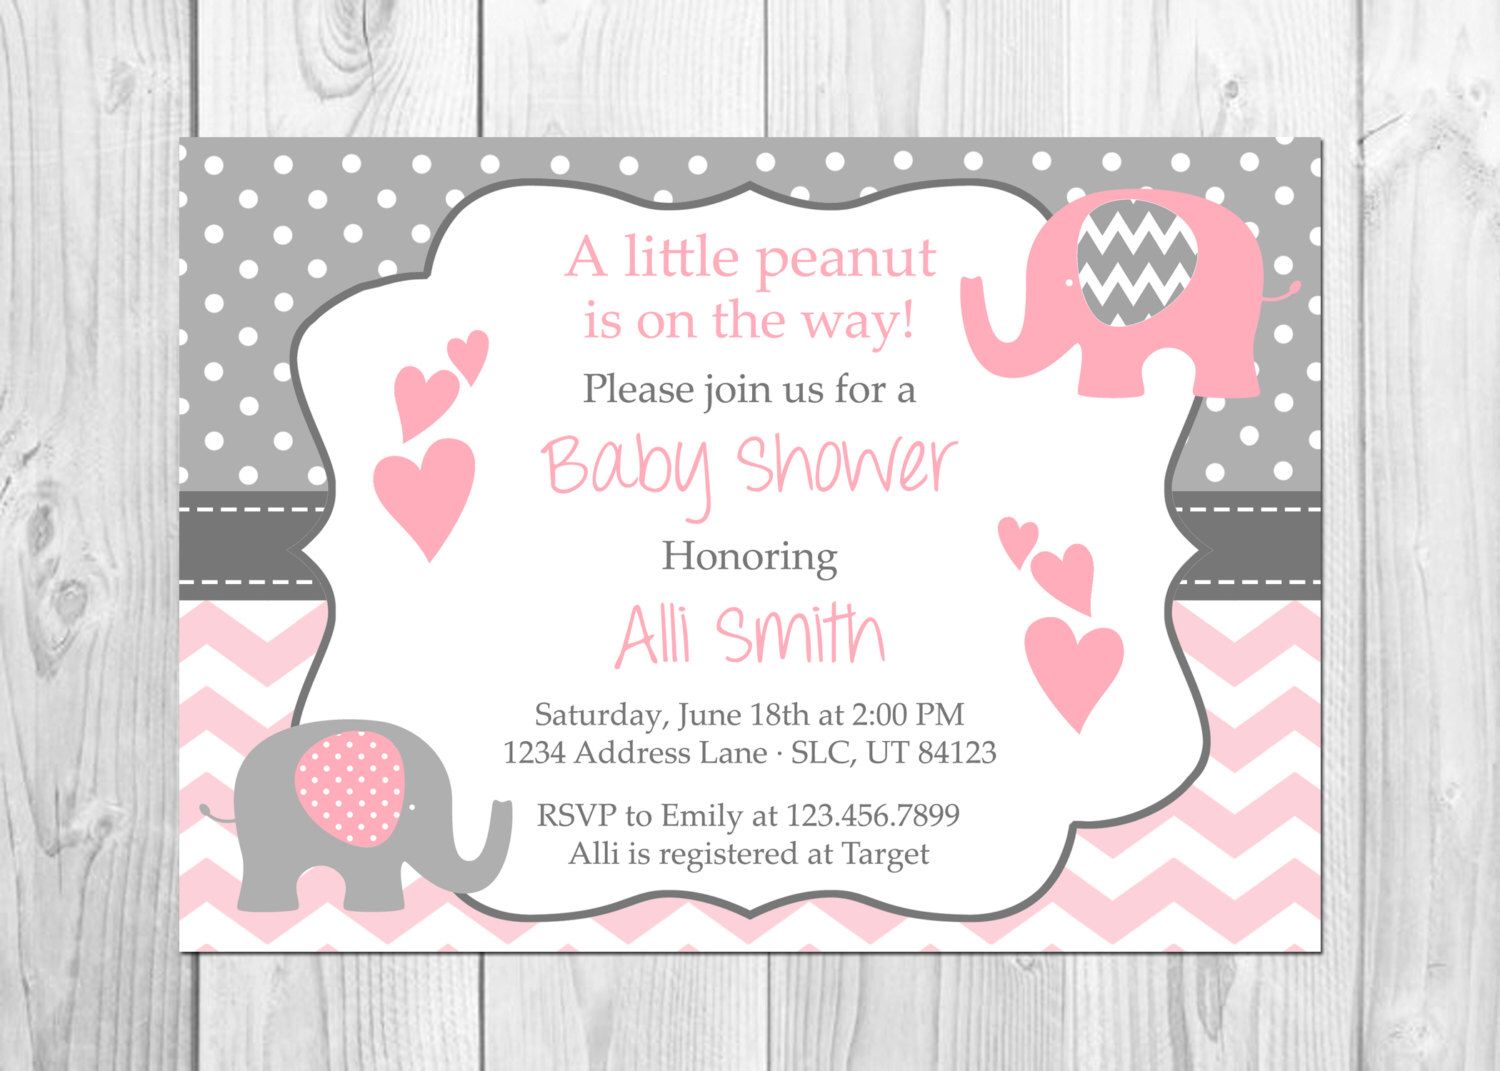 Full Size of Baby Shower:inspirational Elephant Baby Shower Invitations Photo Concepts Elephant Baby Shower Invitations Baby Shower Table Ideas Baby Shower Templates Baby Shower Messages Baby Shower Party Favors Pink And Grey Elephant Baby Shower Invitation Its A Elephant Chevron Pink Little Peanut Baby Shower Invitation Baby Shower By